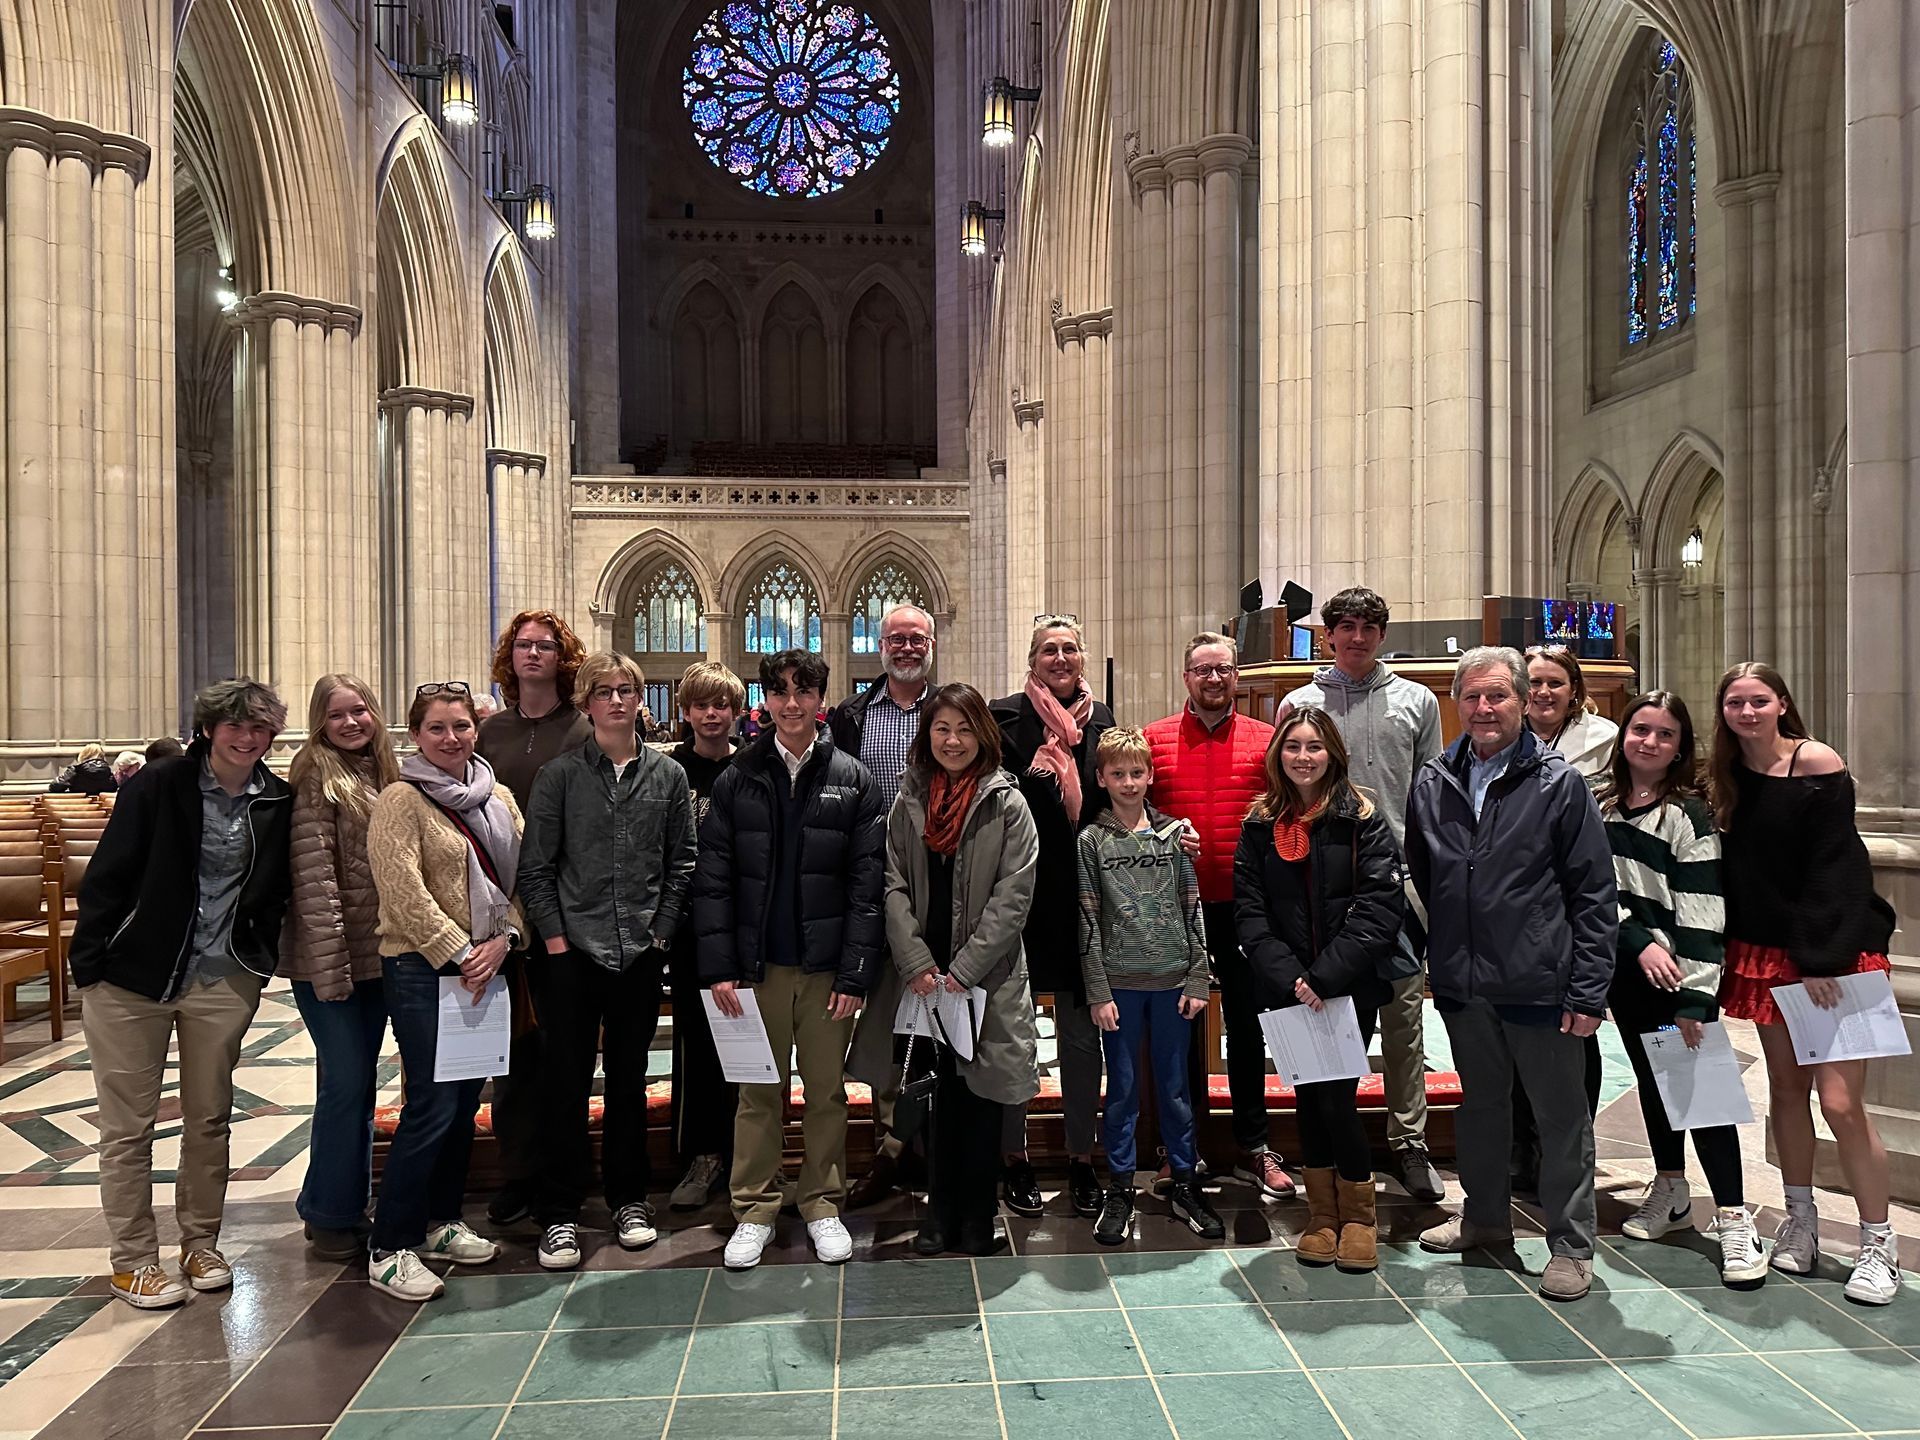 Christ Church and St. John's McLean after a tour of the Washington National Cathedral